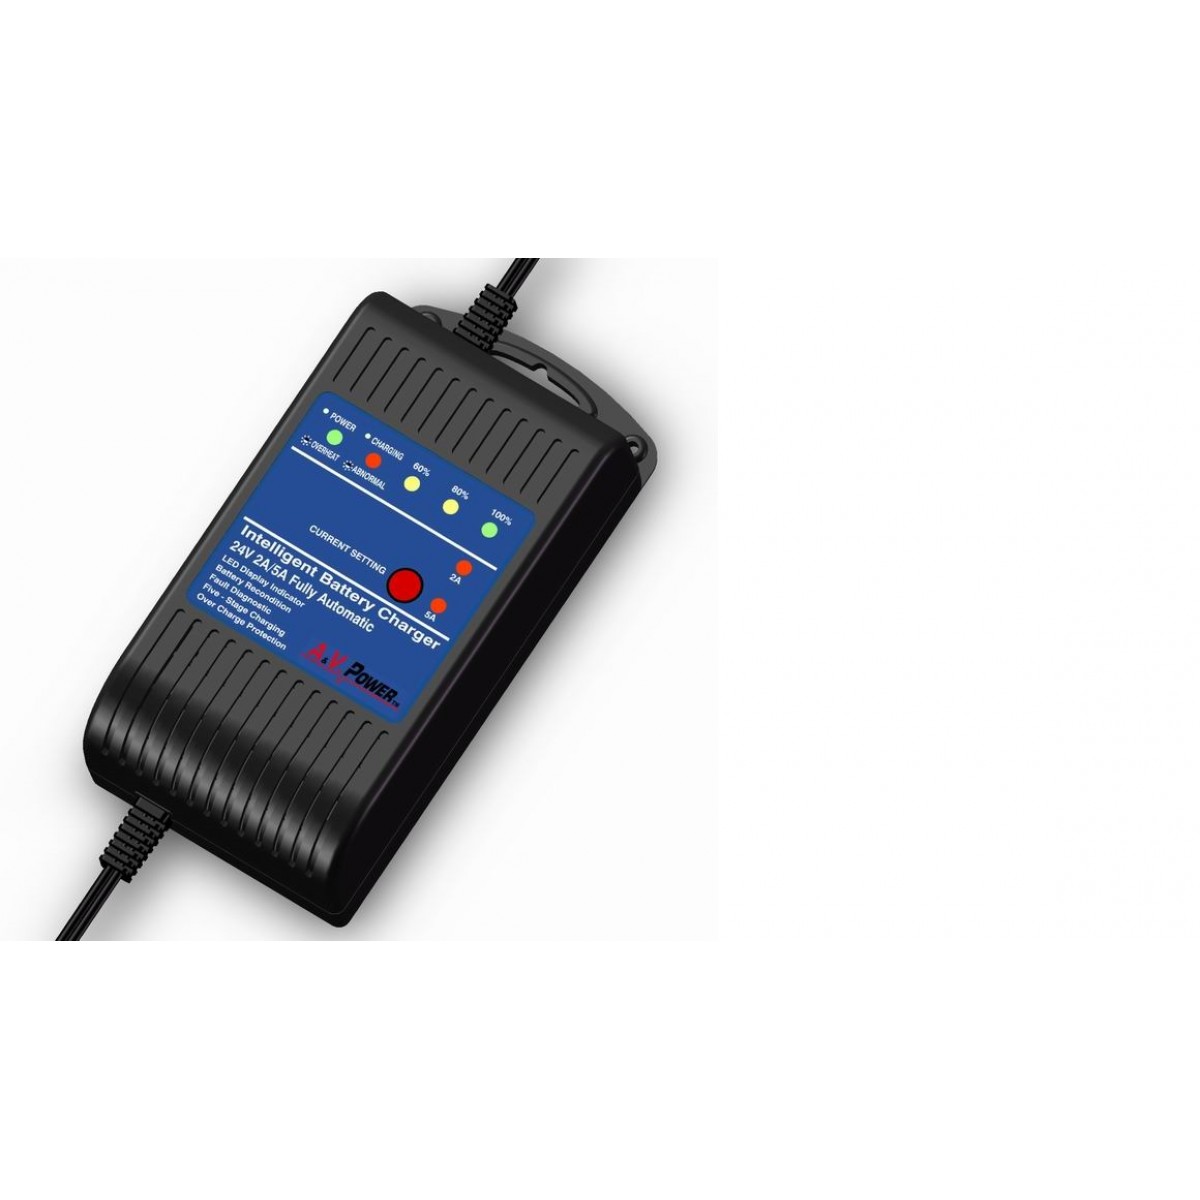 12V Inteli-charger-diy - C06 Series Switching Power Charger- A&V Power  Transformer Manufacturer